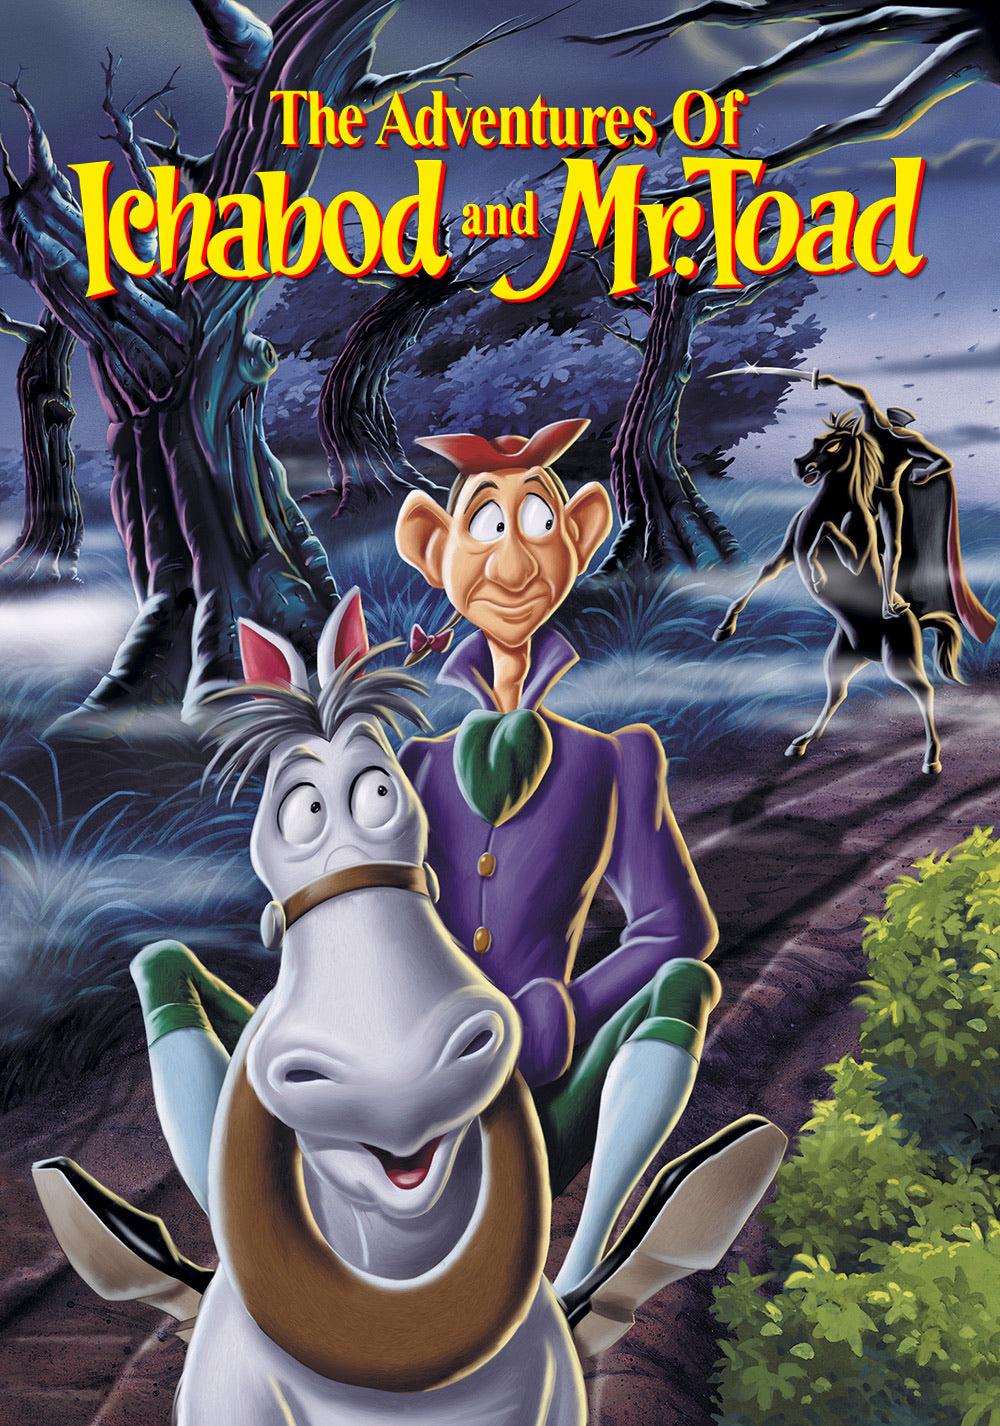 The Adventures of Ichabod and Mr. Toad (1949) Vudu or Movies Anywhere HD redemption only